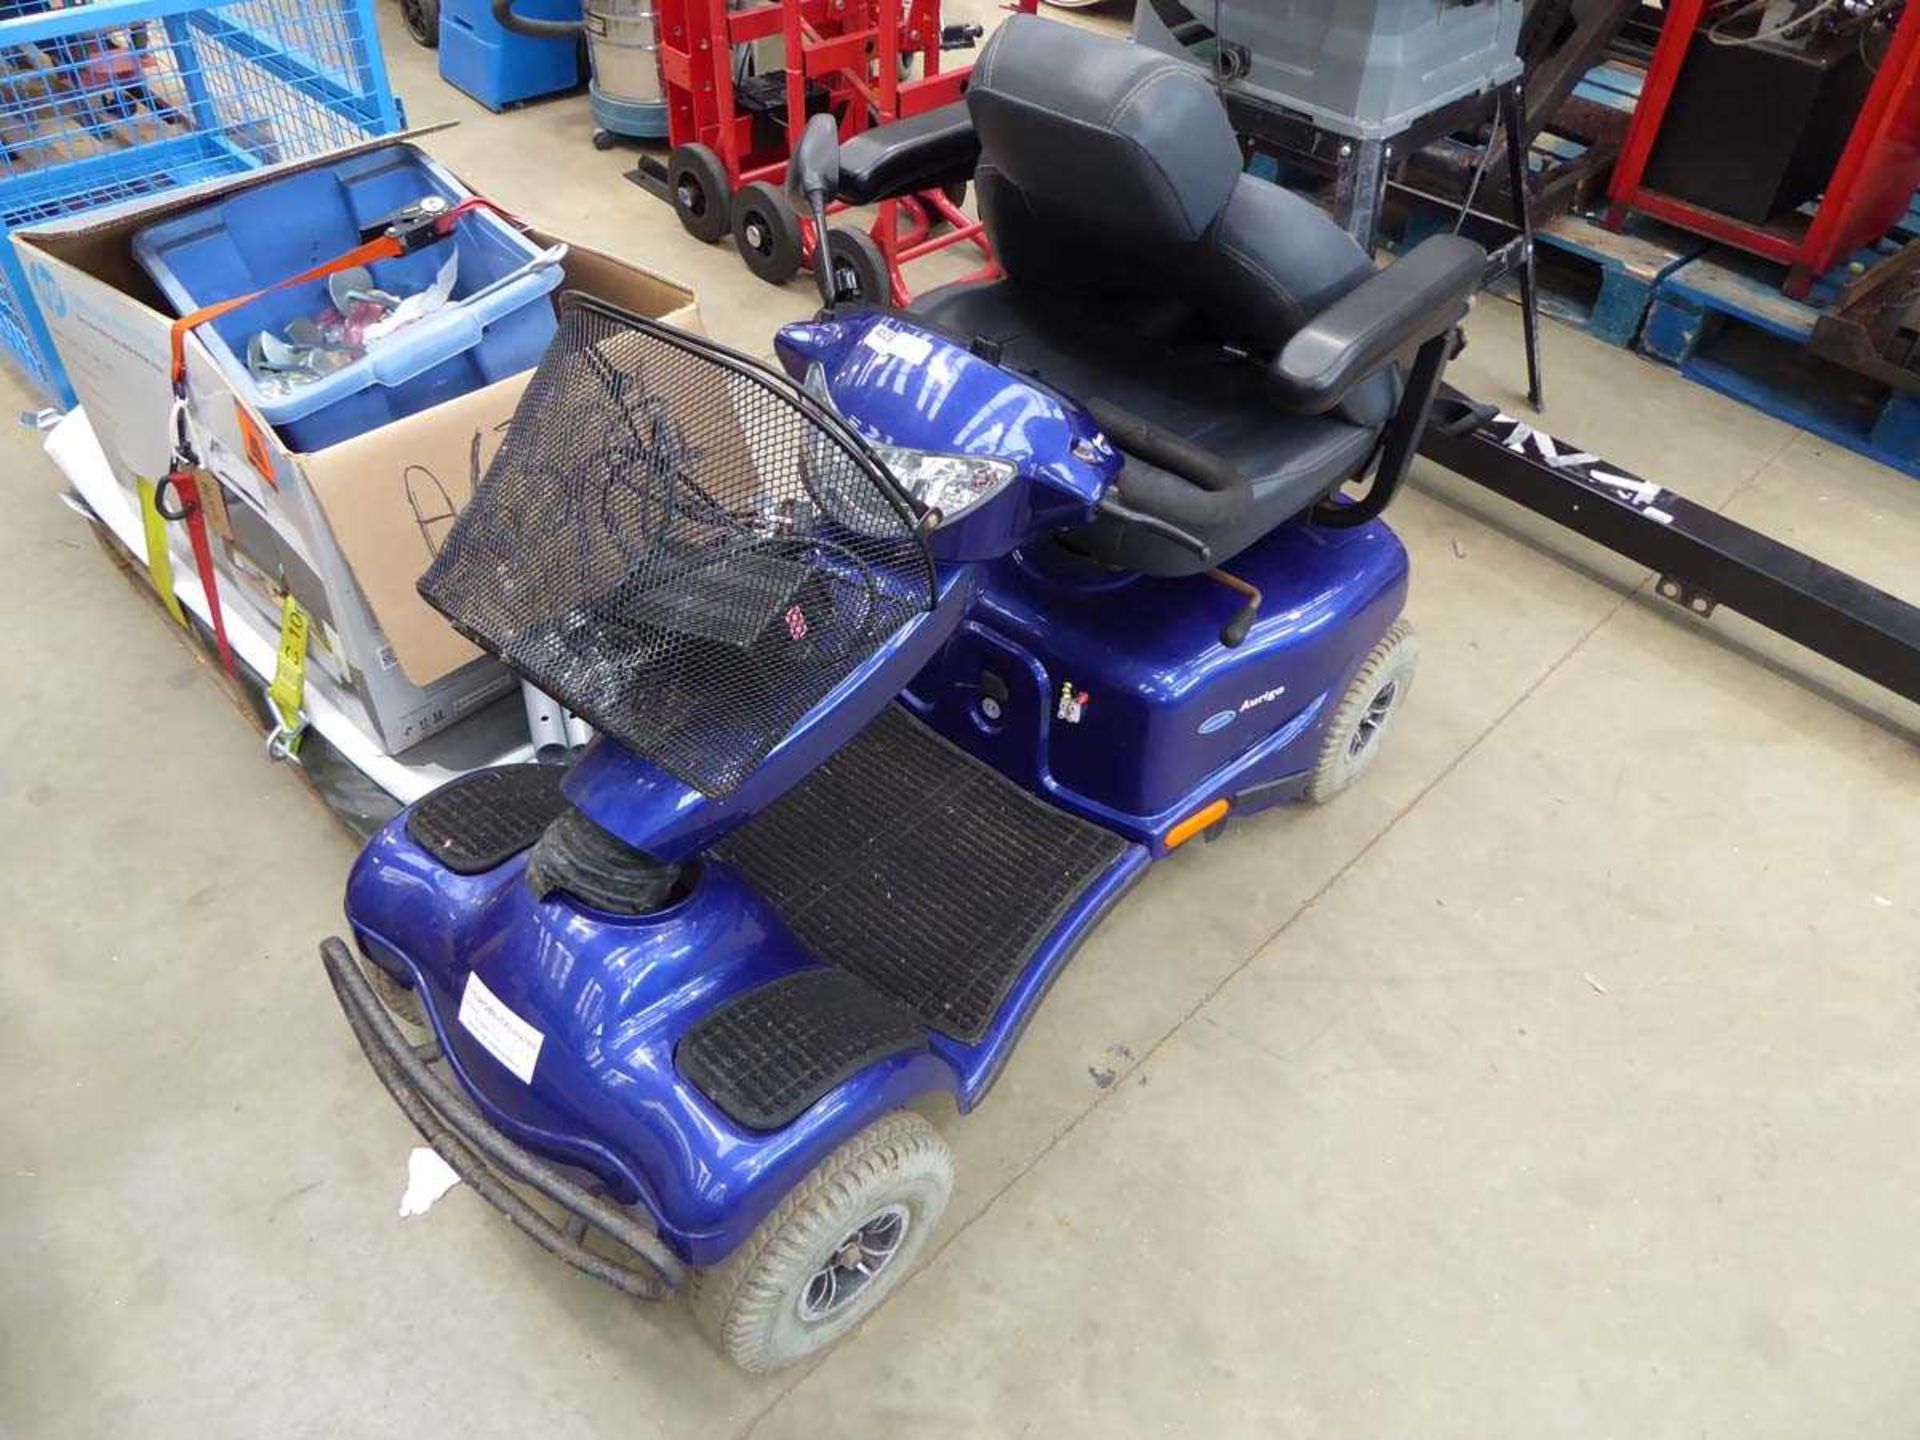 Invacare disability scooter in blue with charger